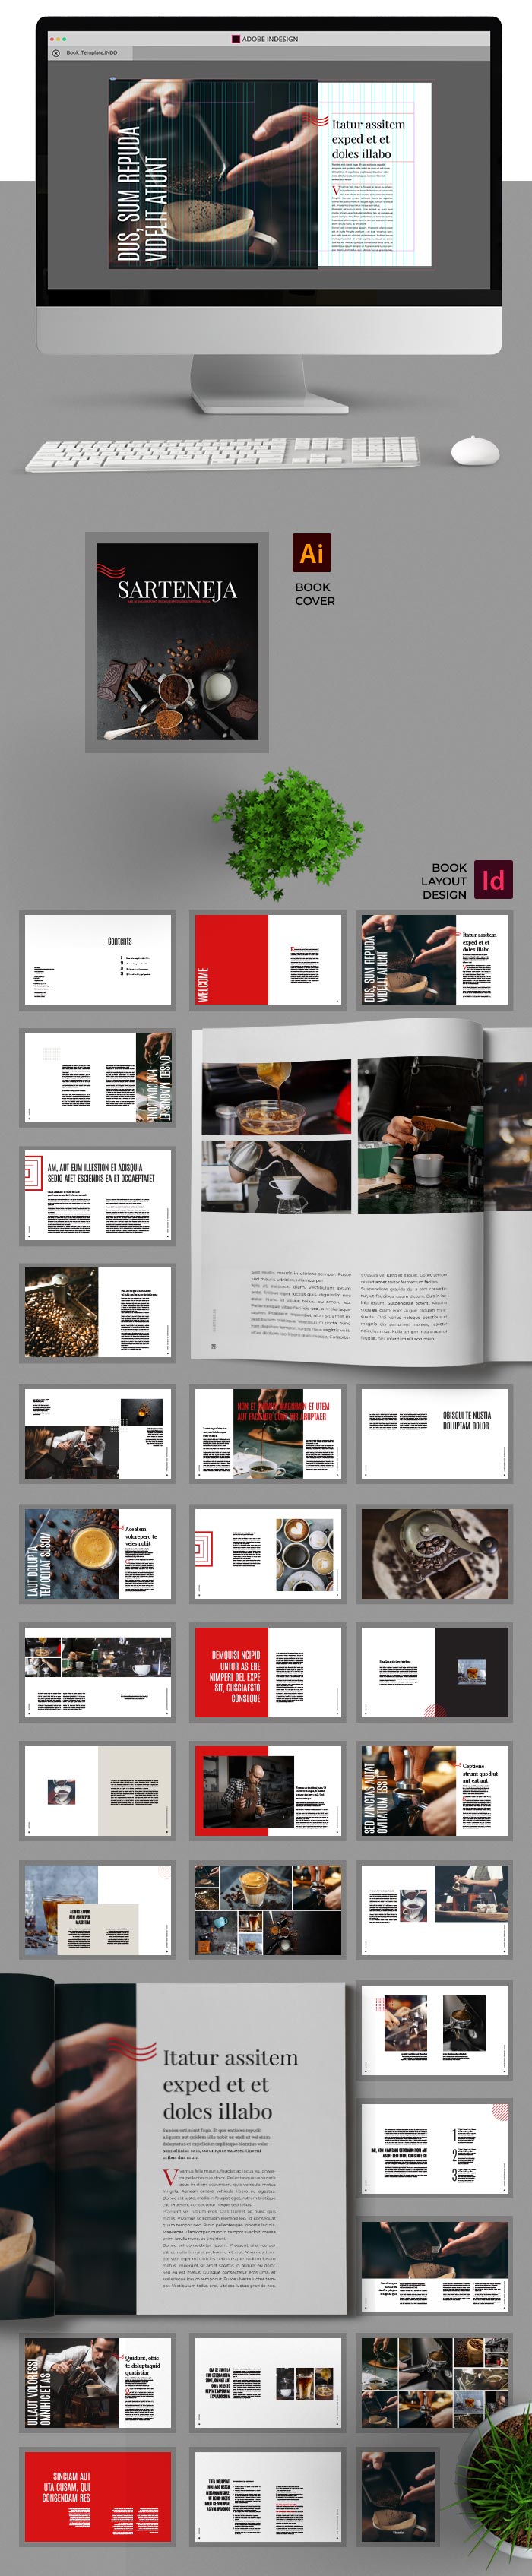 coffee table book pdf free download